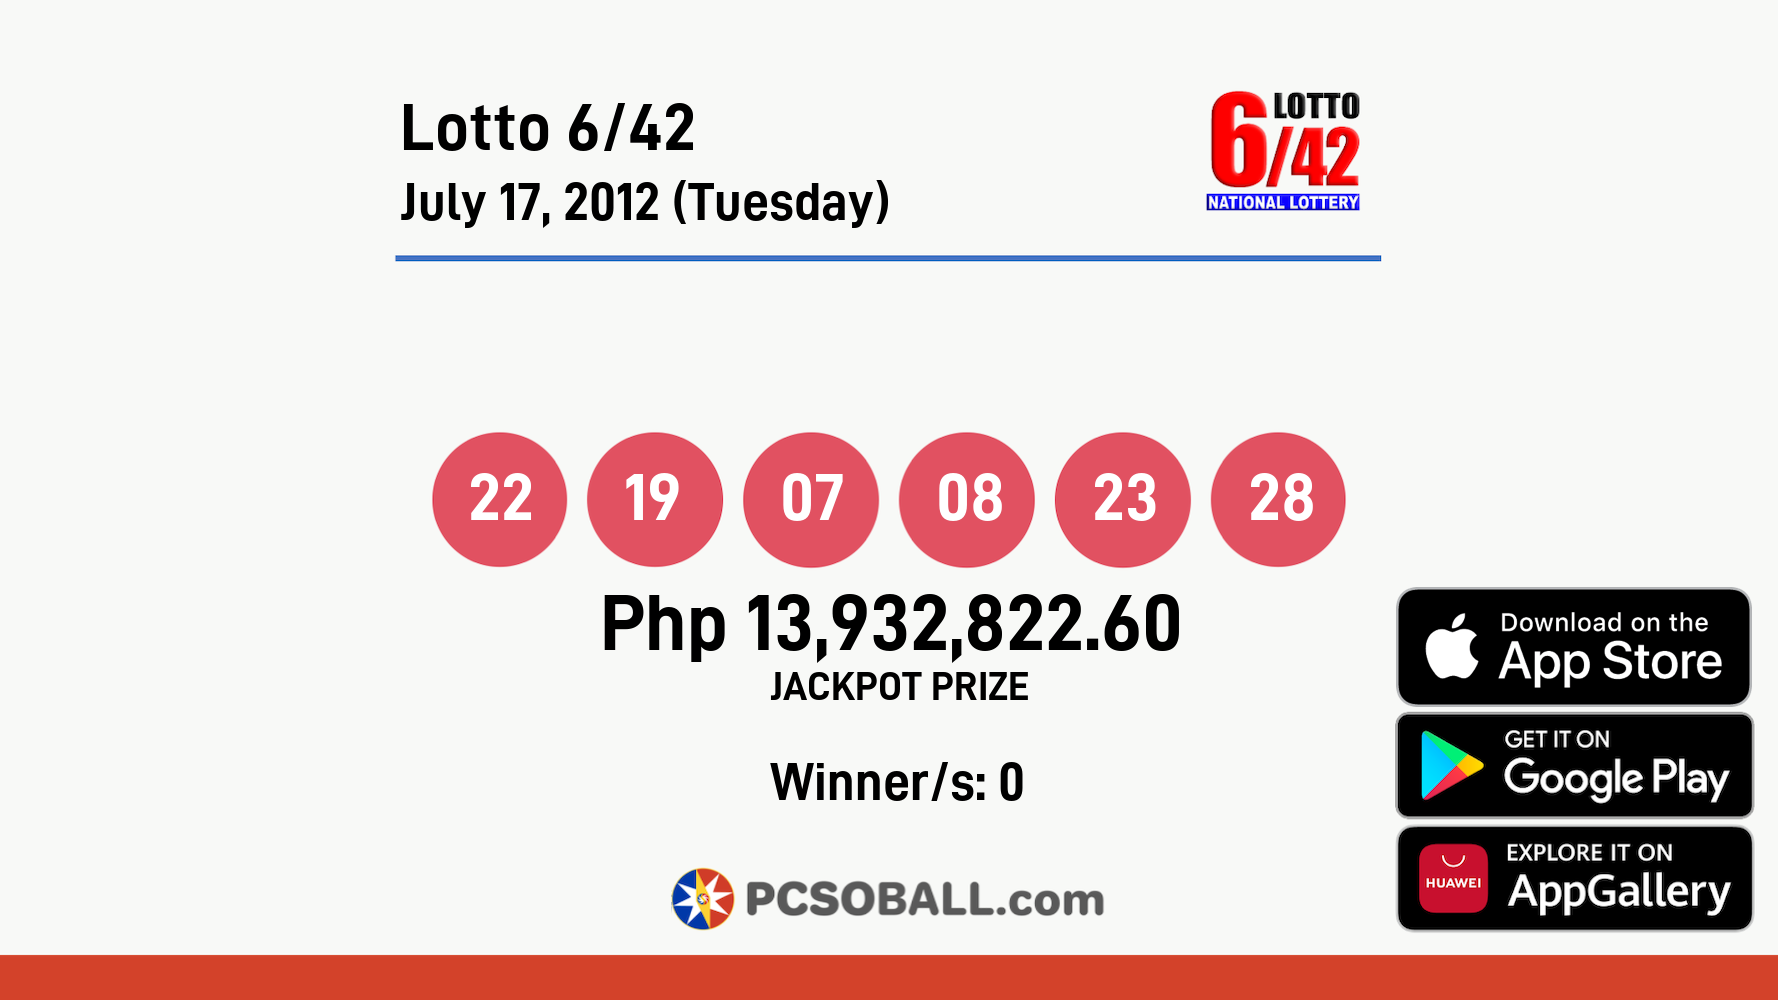 Lotto 6/42 July 17, 2012 (Tuesday) Result